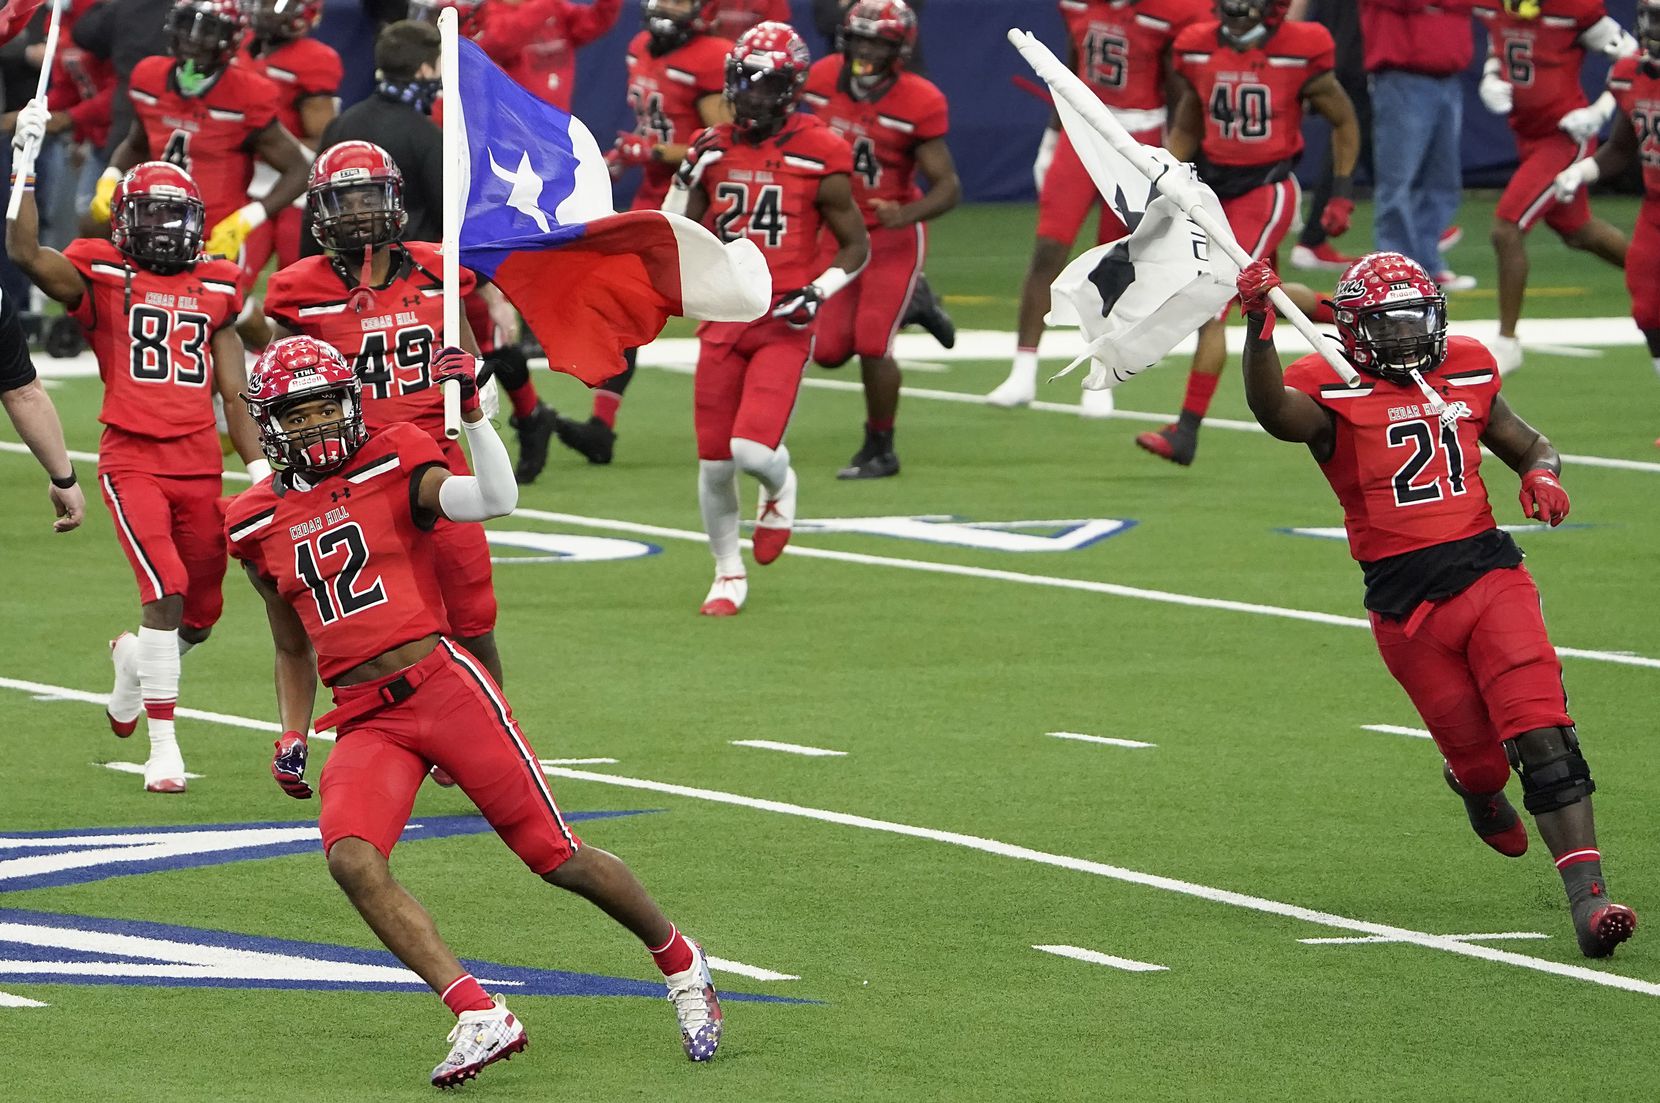 Cedar Hill’s Brian Rainey (12) and Kris Allen (21) carry flags as they lead their team on to the field to face Katy in Class 6A Division II state football championship  game at AT&T Stadium on Saturday, Jan. 16, 2021, in Arlington, Texas.